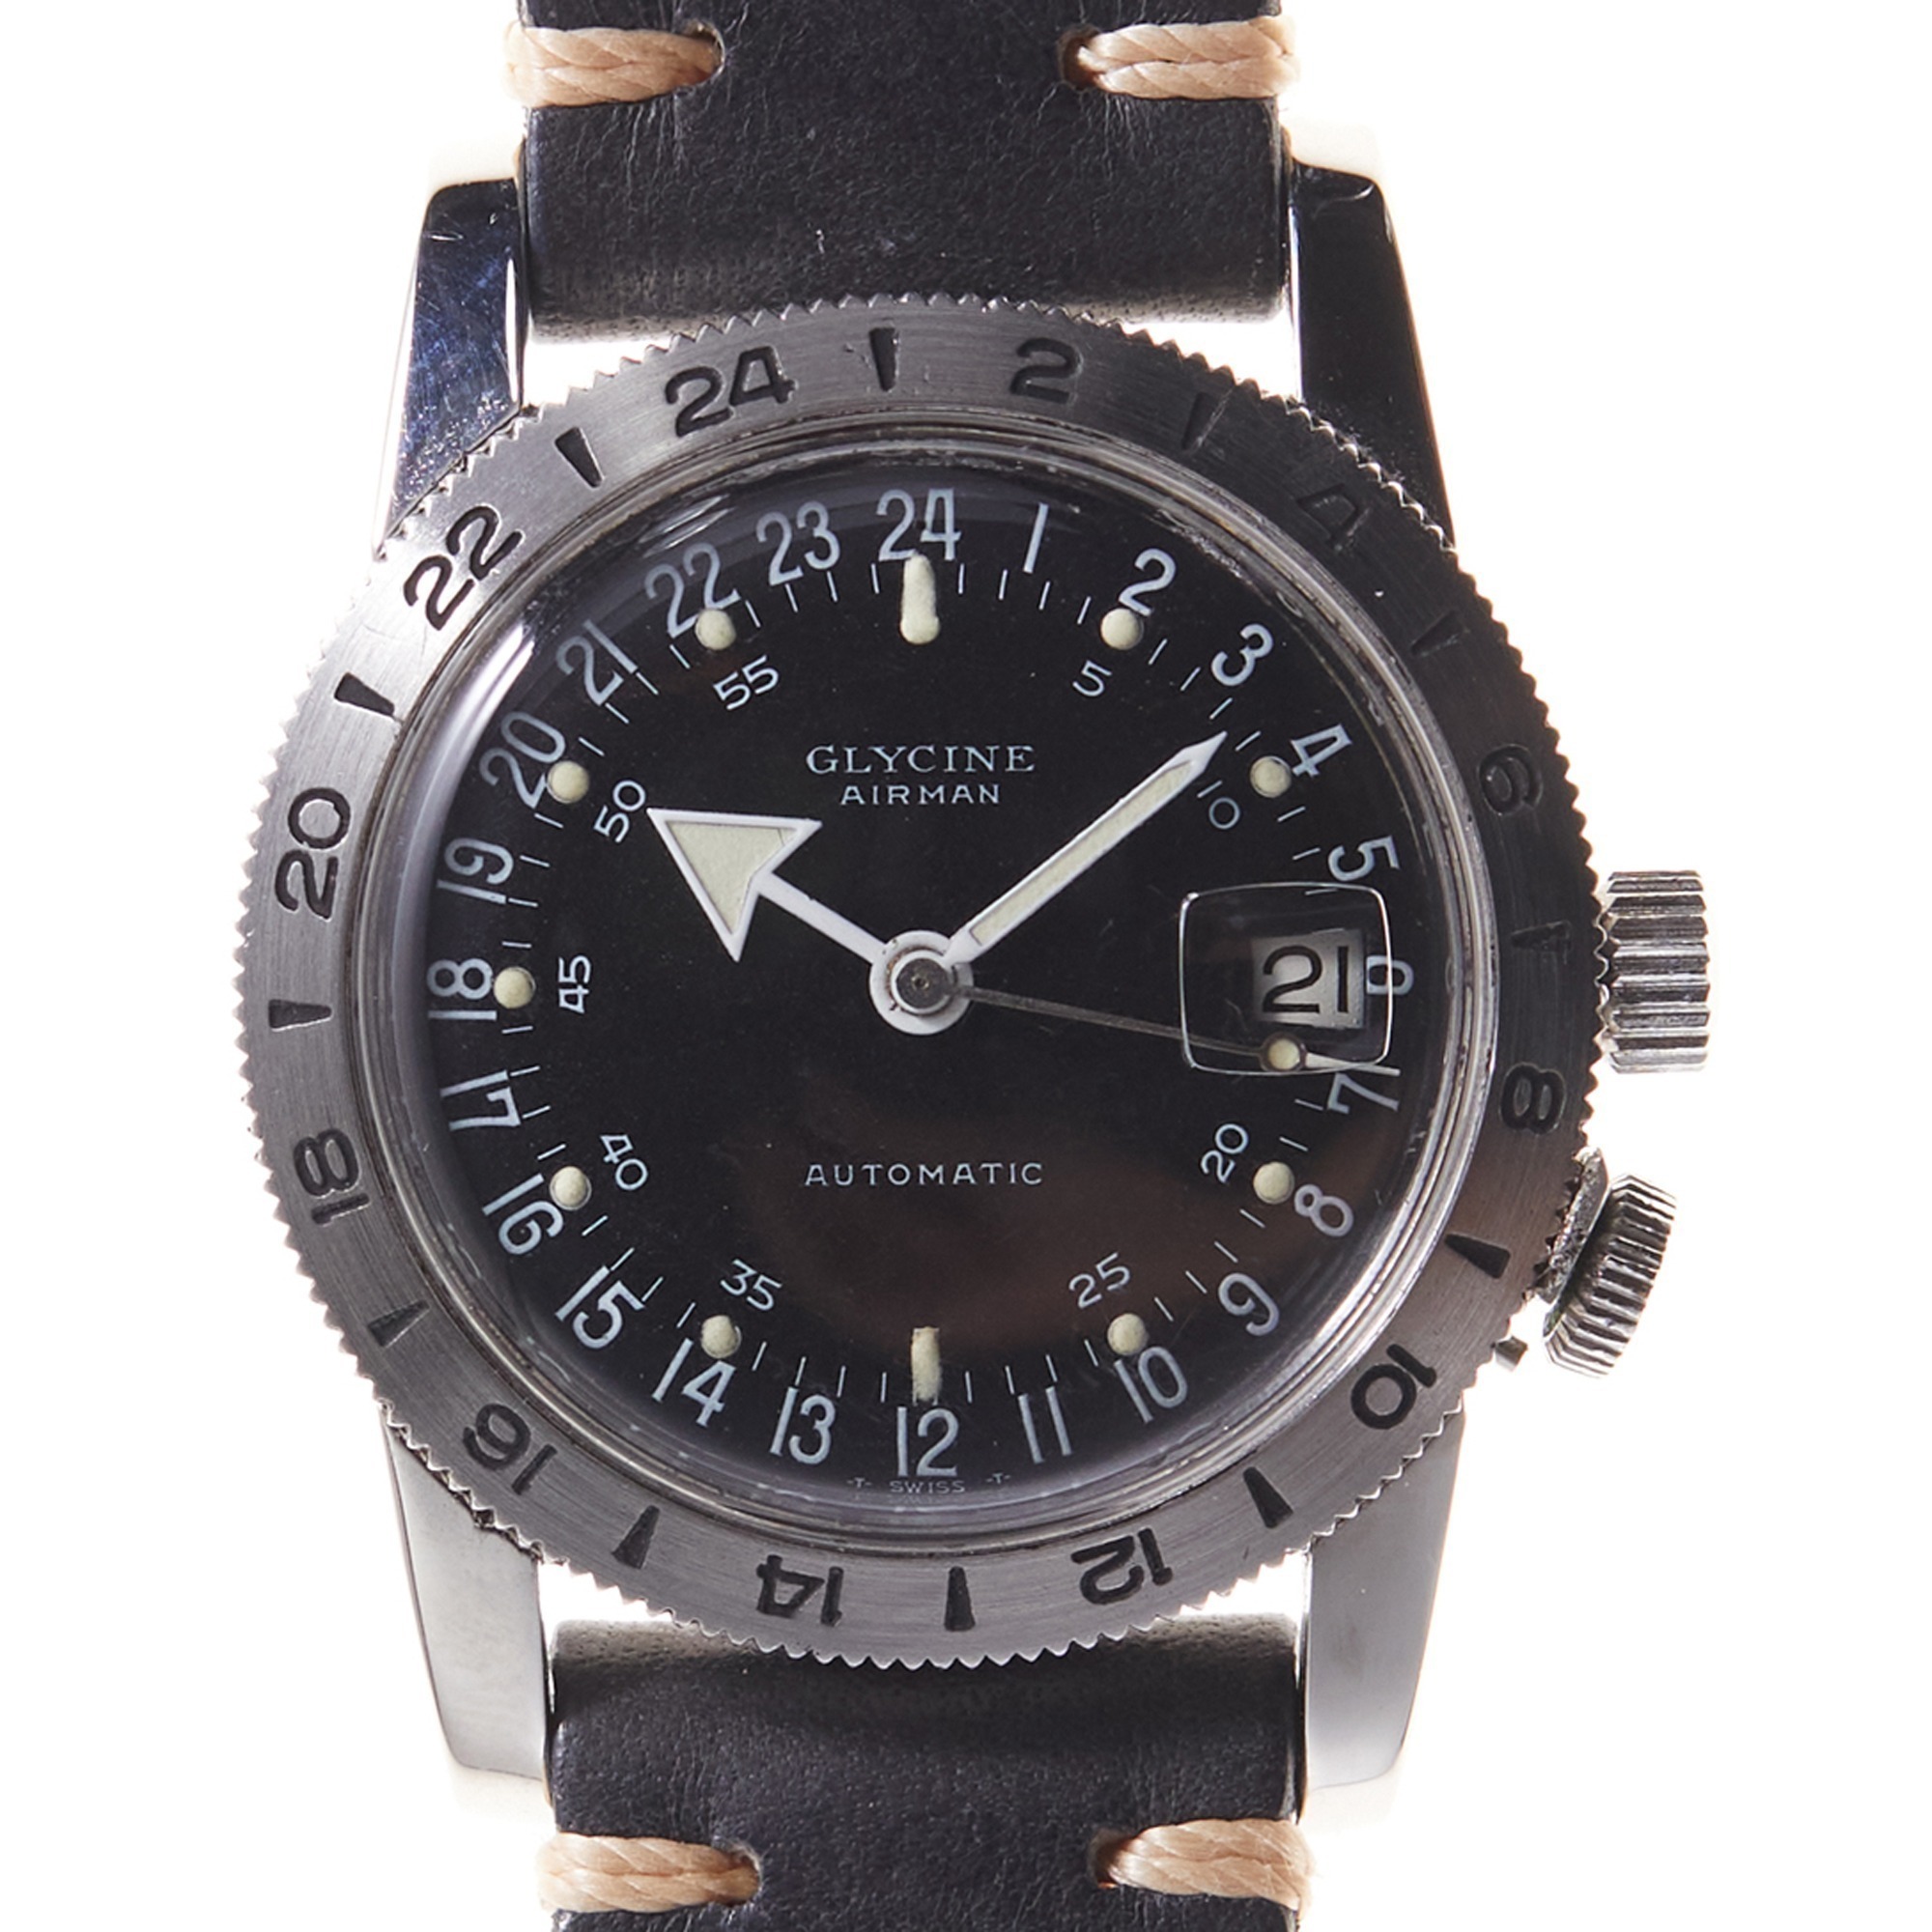 Glycine Airman Stainless Steel Automatic Pilot's Watch